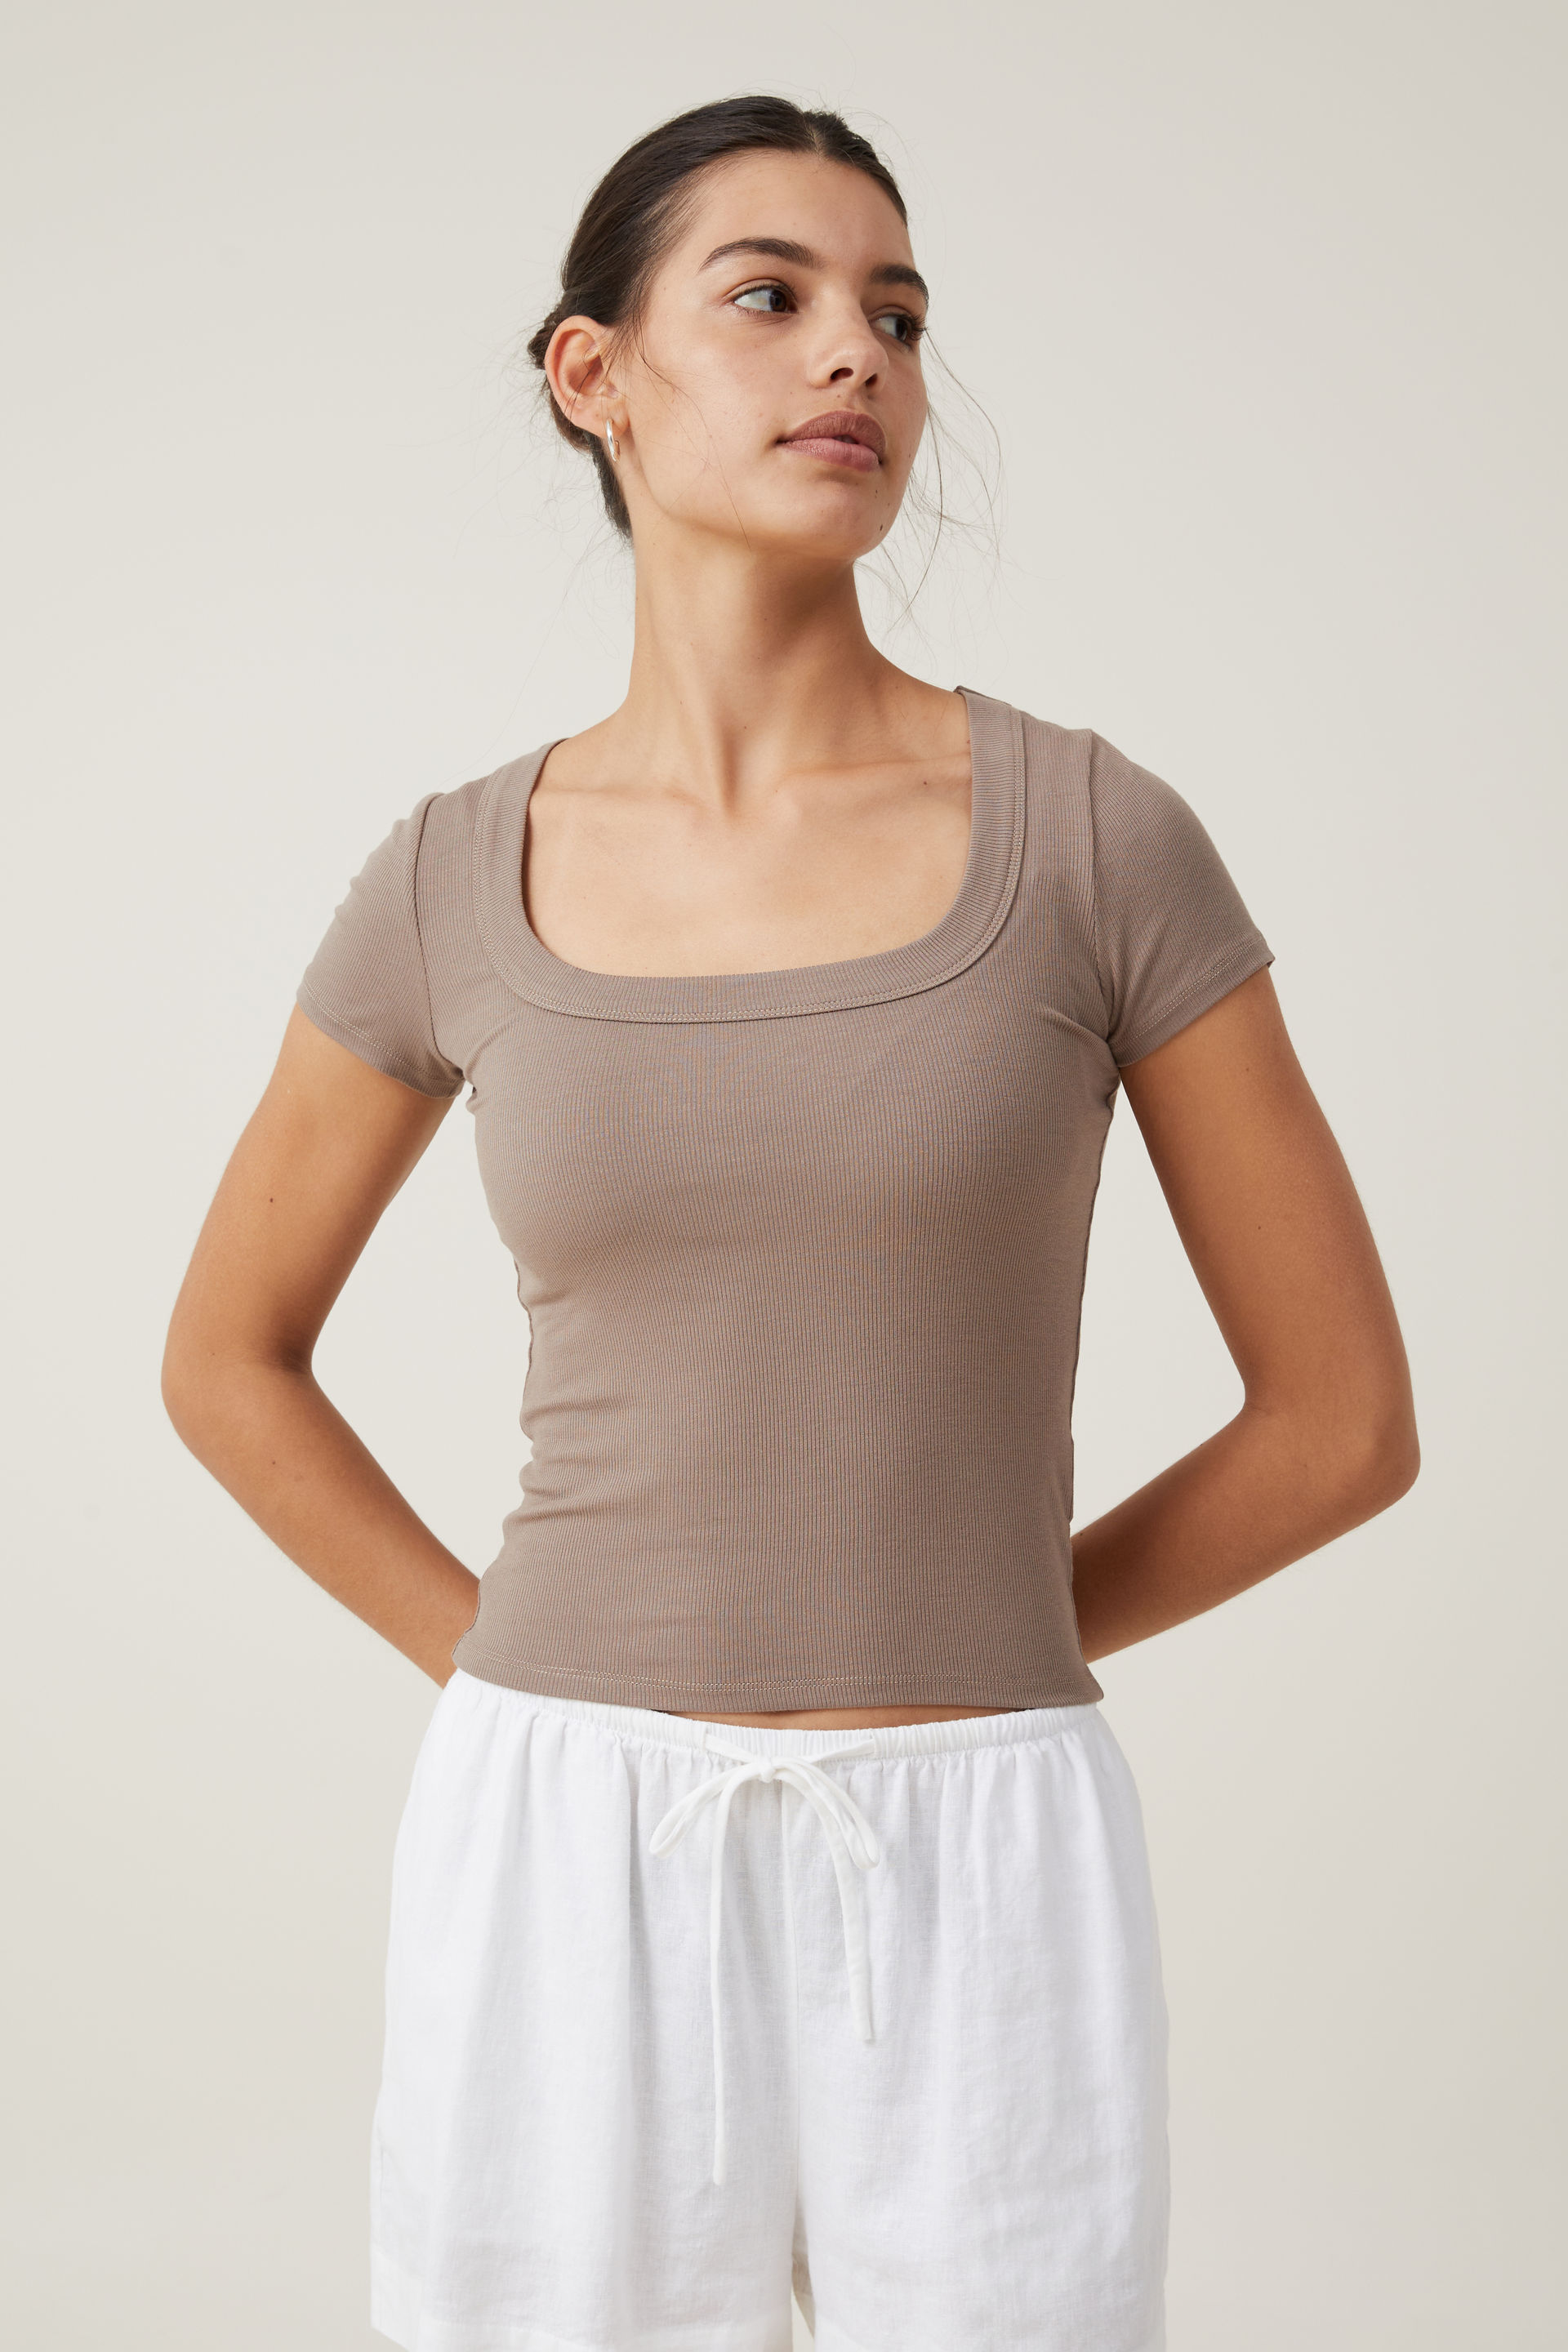 Cotton On Women - Staple Rib Scoop Neck Short Sleeve Top - Rich taupe